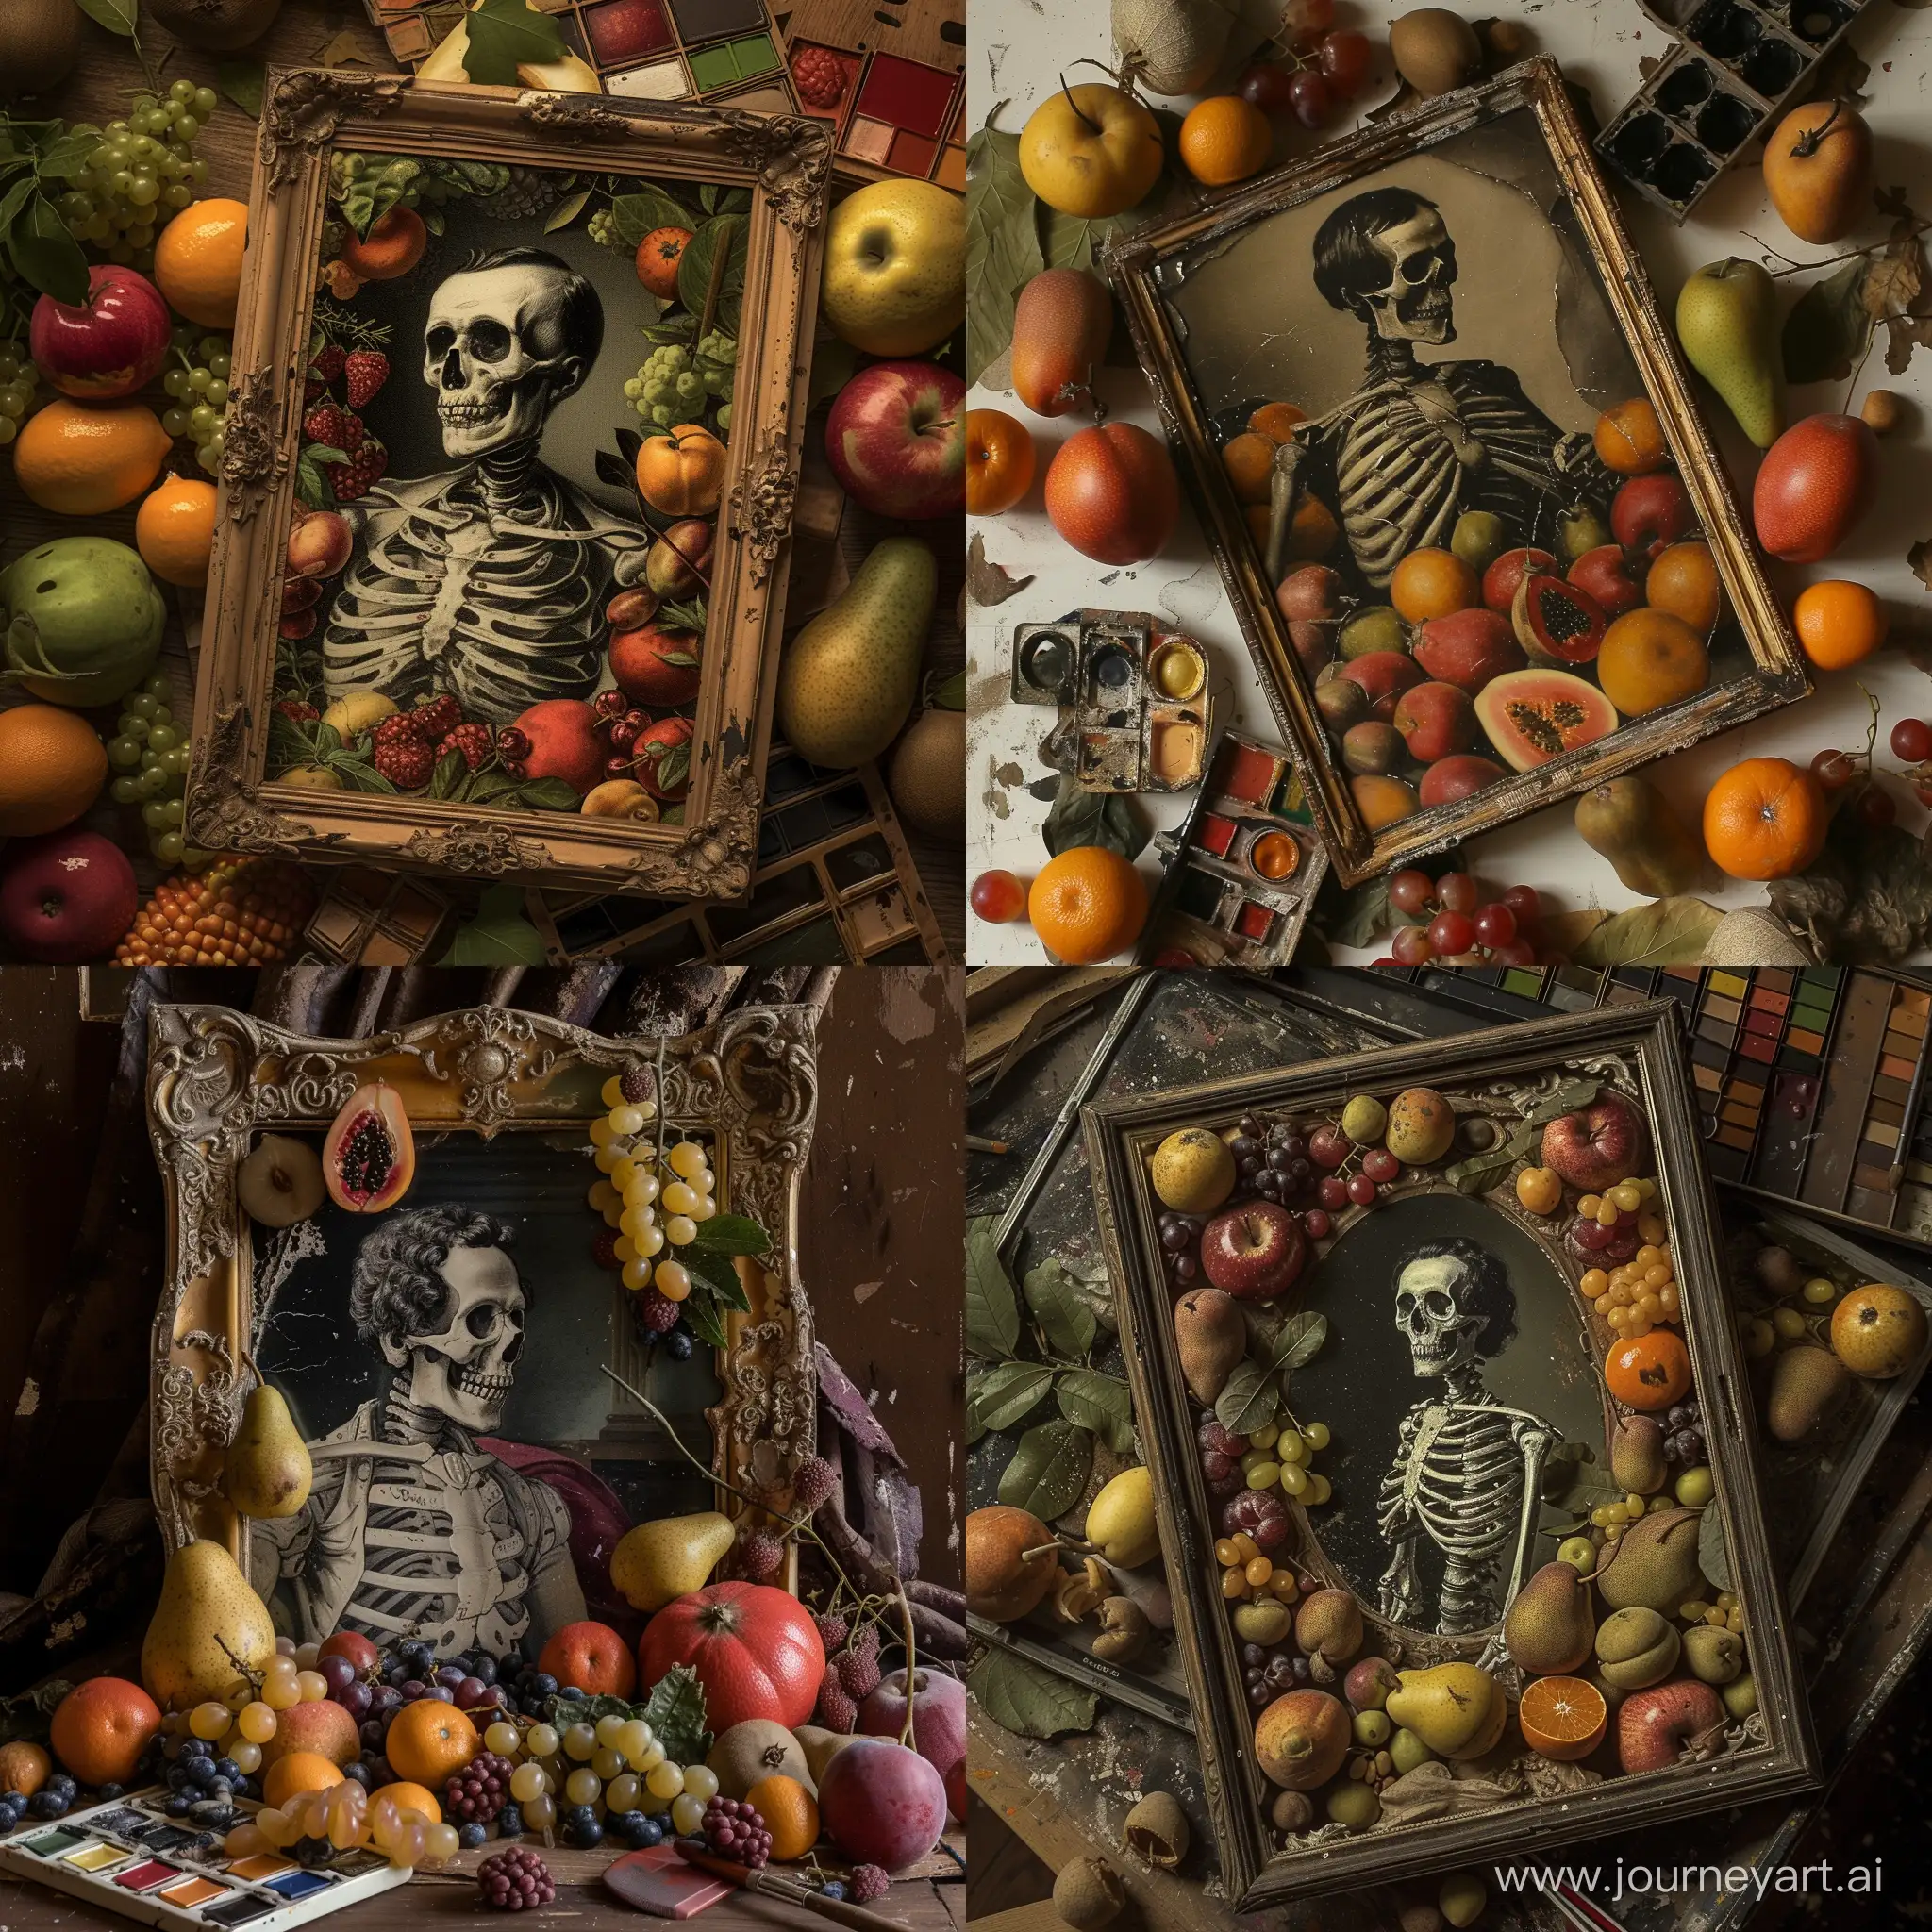 A skeleton photo of a man in Napoleon's era surrounded by fruits in the form of an old photo with an old palette.